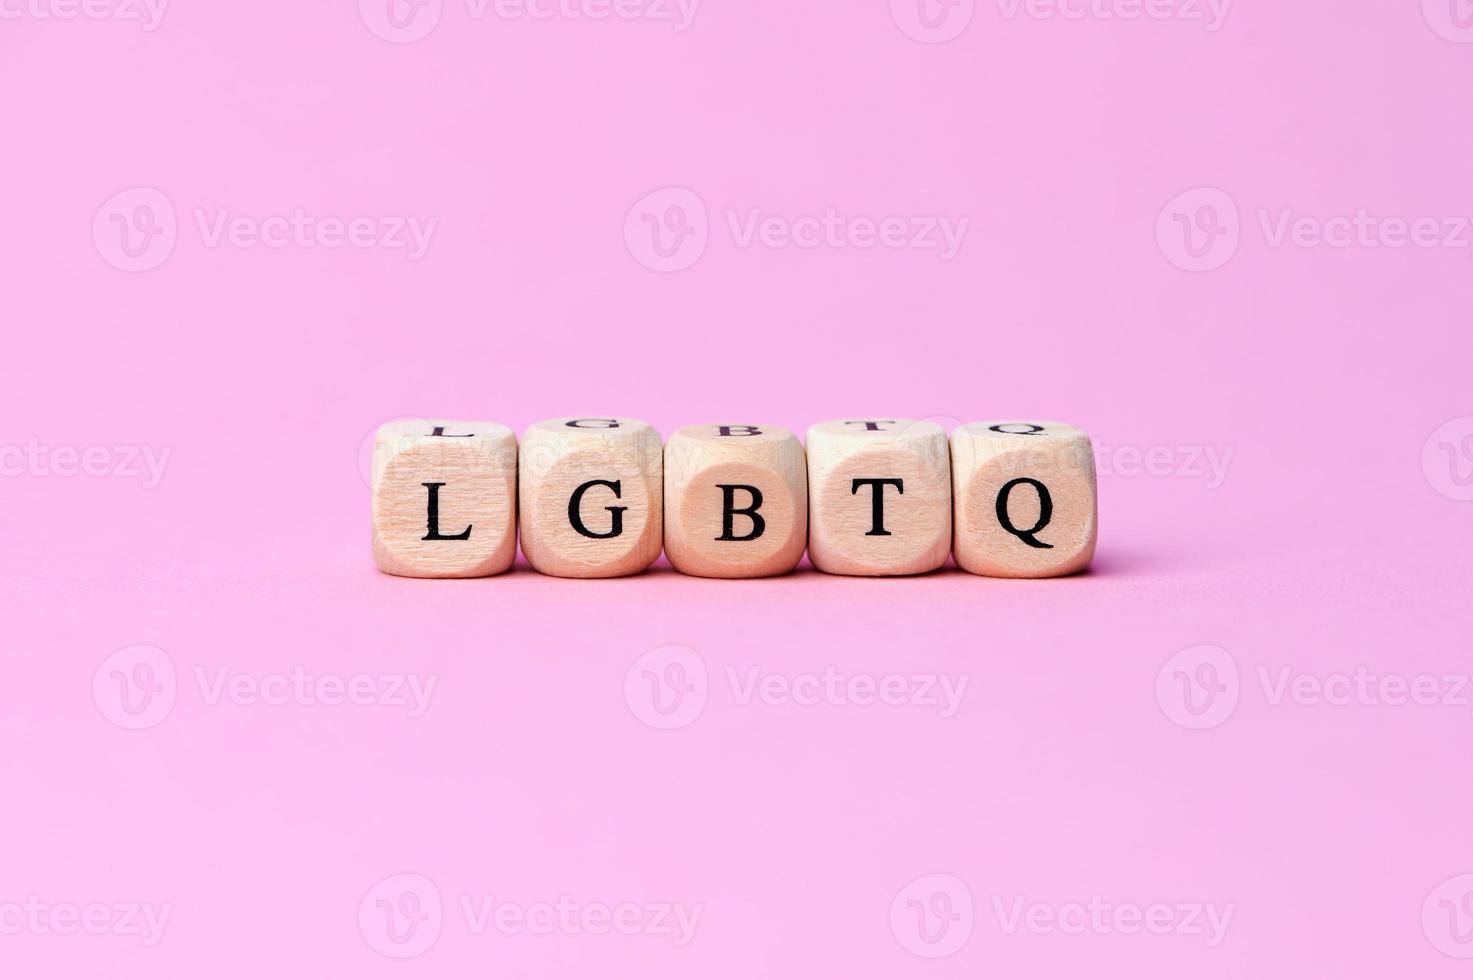 wooden cubes with the capital letters LGBTQ which is the abbreviation for lesbian, gay, bisexual, transgendered and queer photo